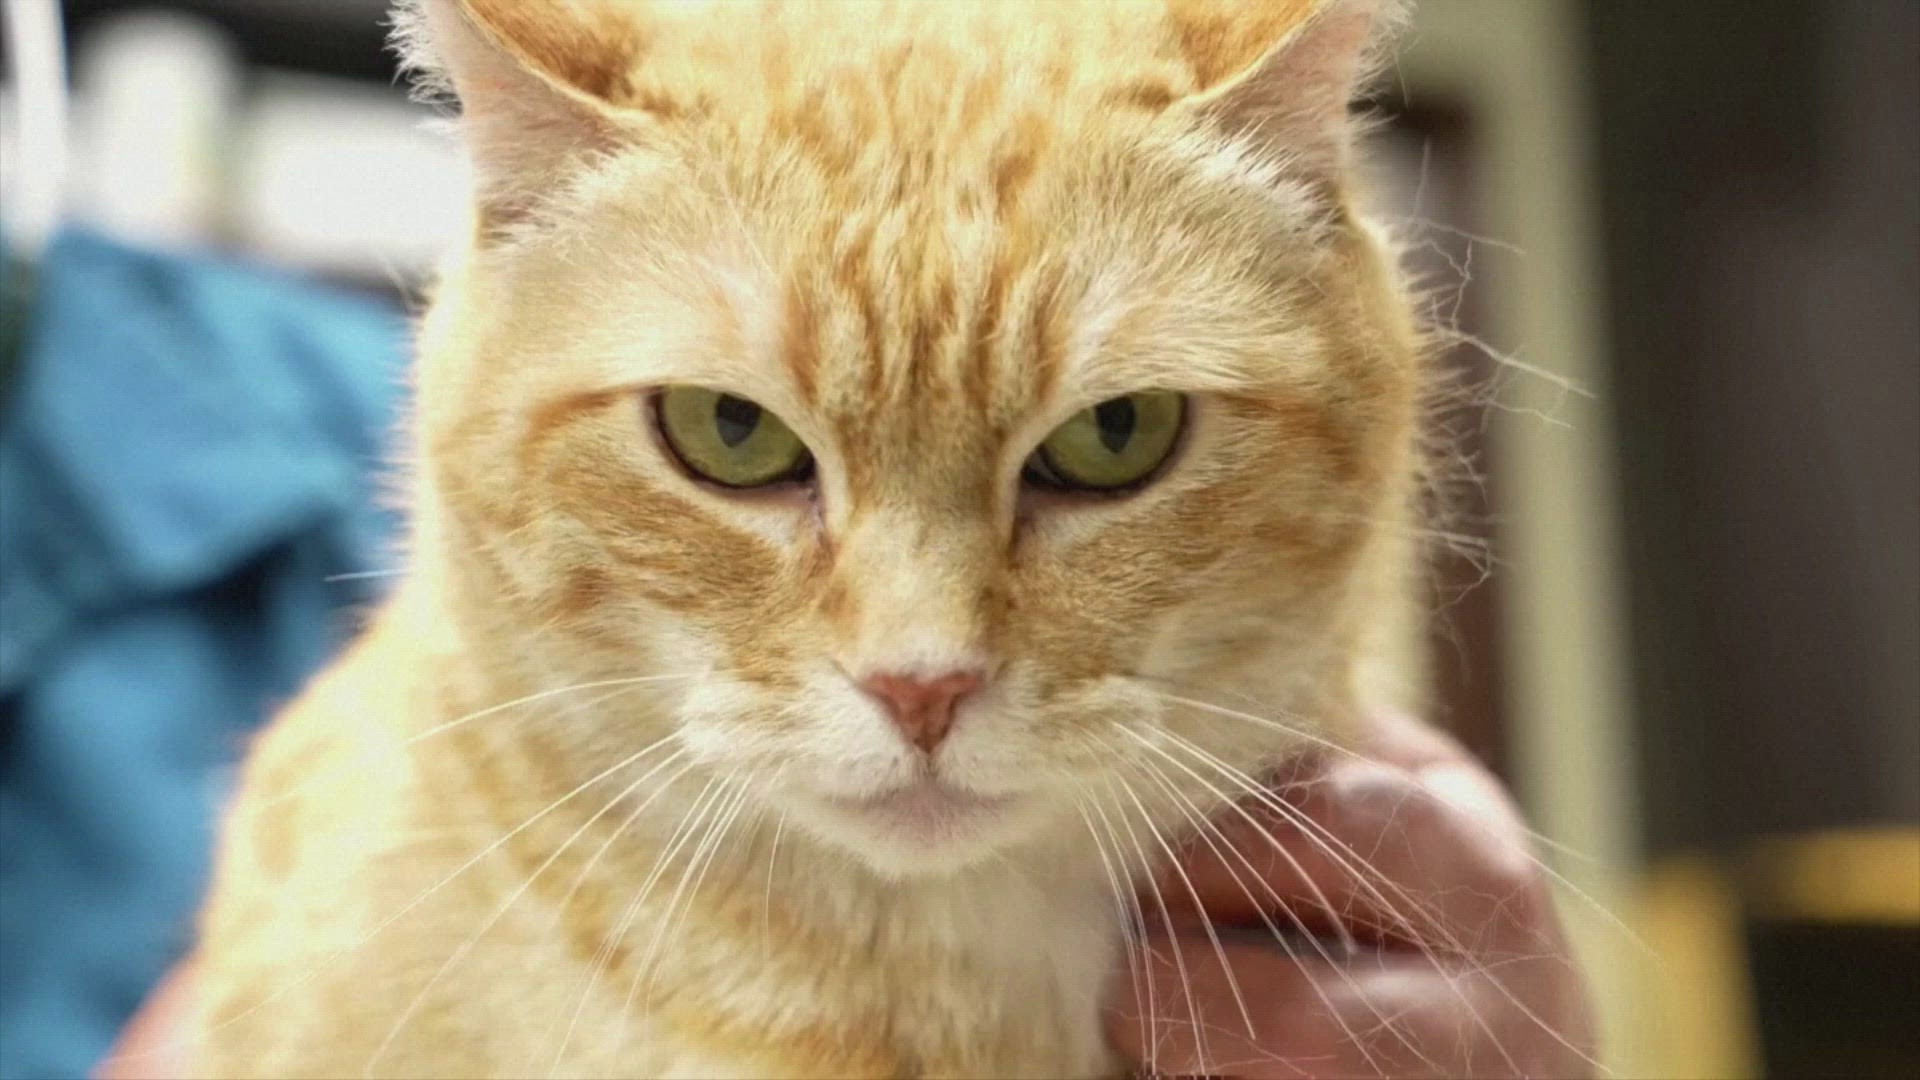 If you're a cat owner and think your pet is feline down...there's an app to help you to determine your pet's demeanor. Buzz60's Mercer Morrison has the story.